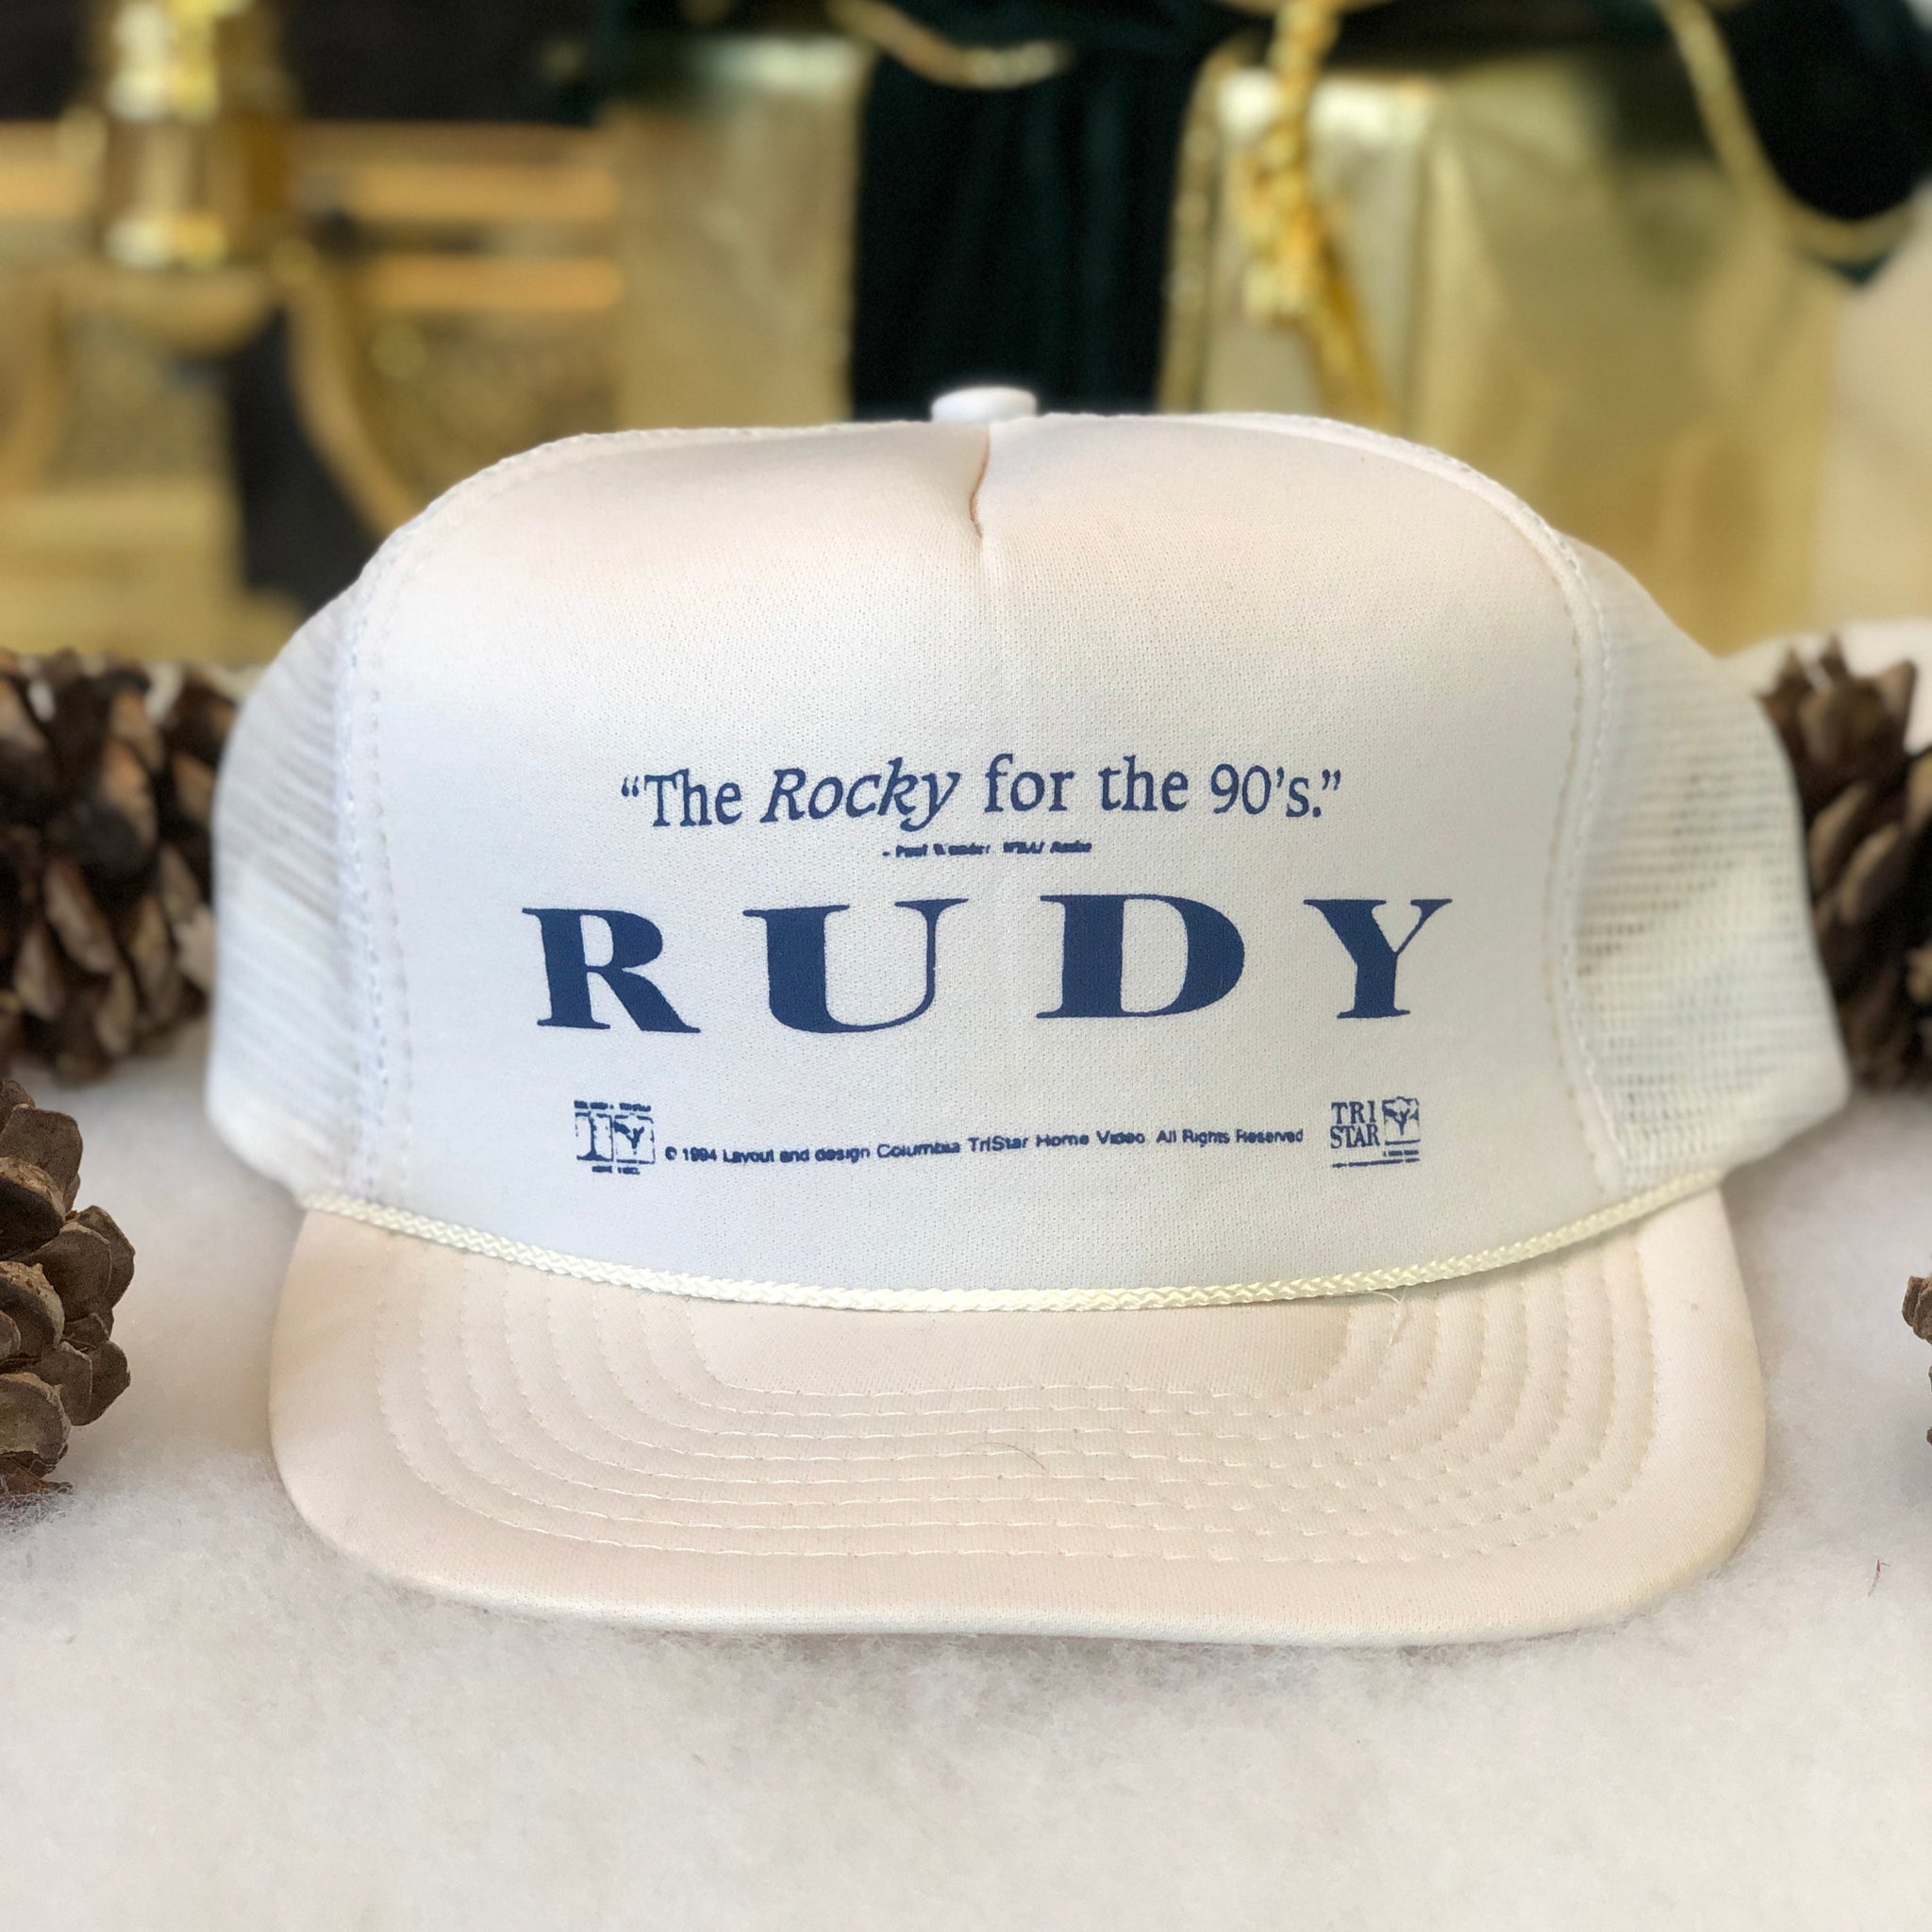 Vintage Deadstock NWOT 1994 Rudy "The Rocky for the 90's" Movie Trucker Hat Snapback